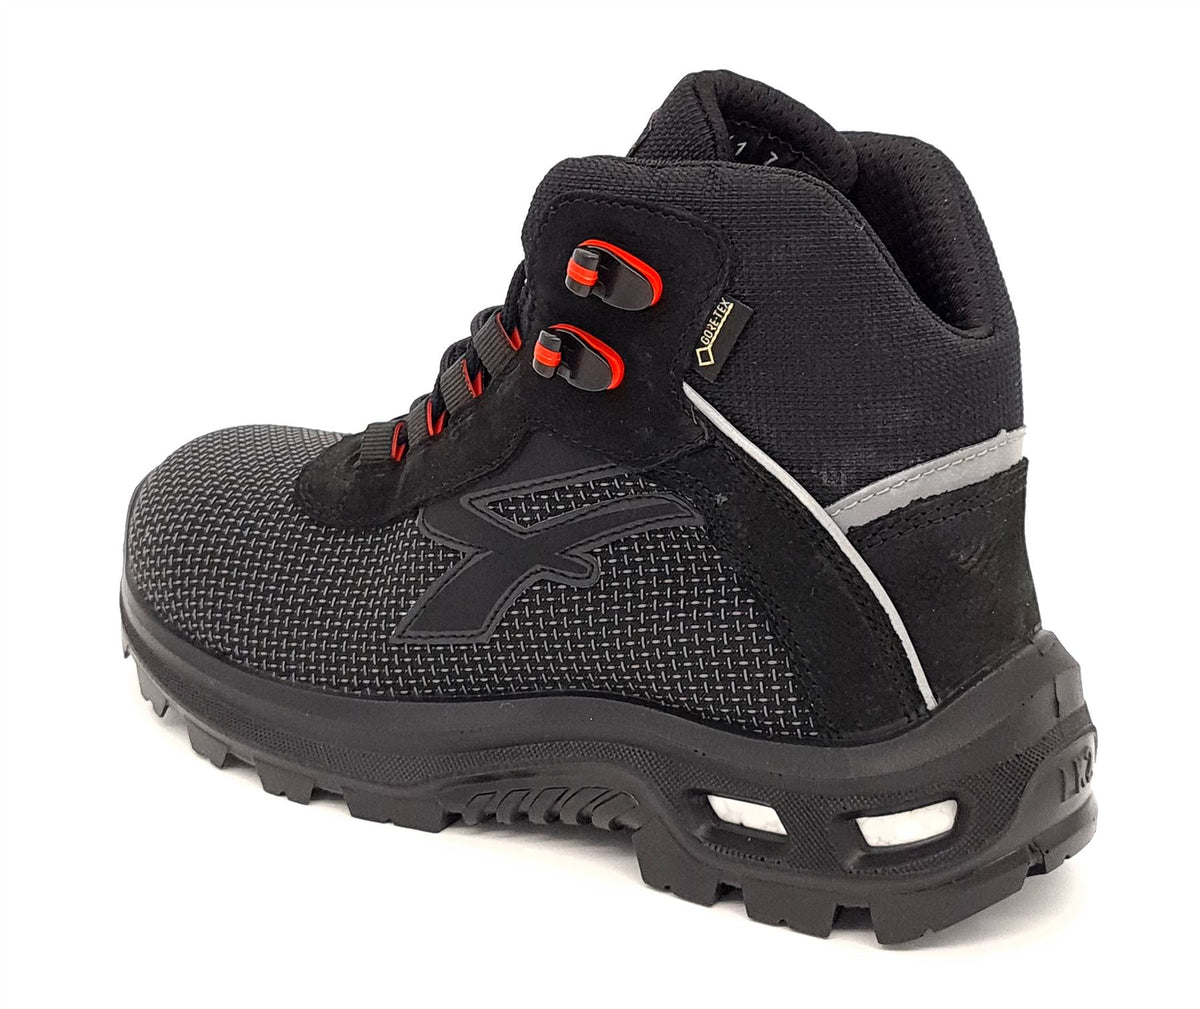 U-Power Domination Gore-Tex Mens Safety Toecap Midsole S3 Lace Up Work Boots